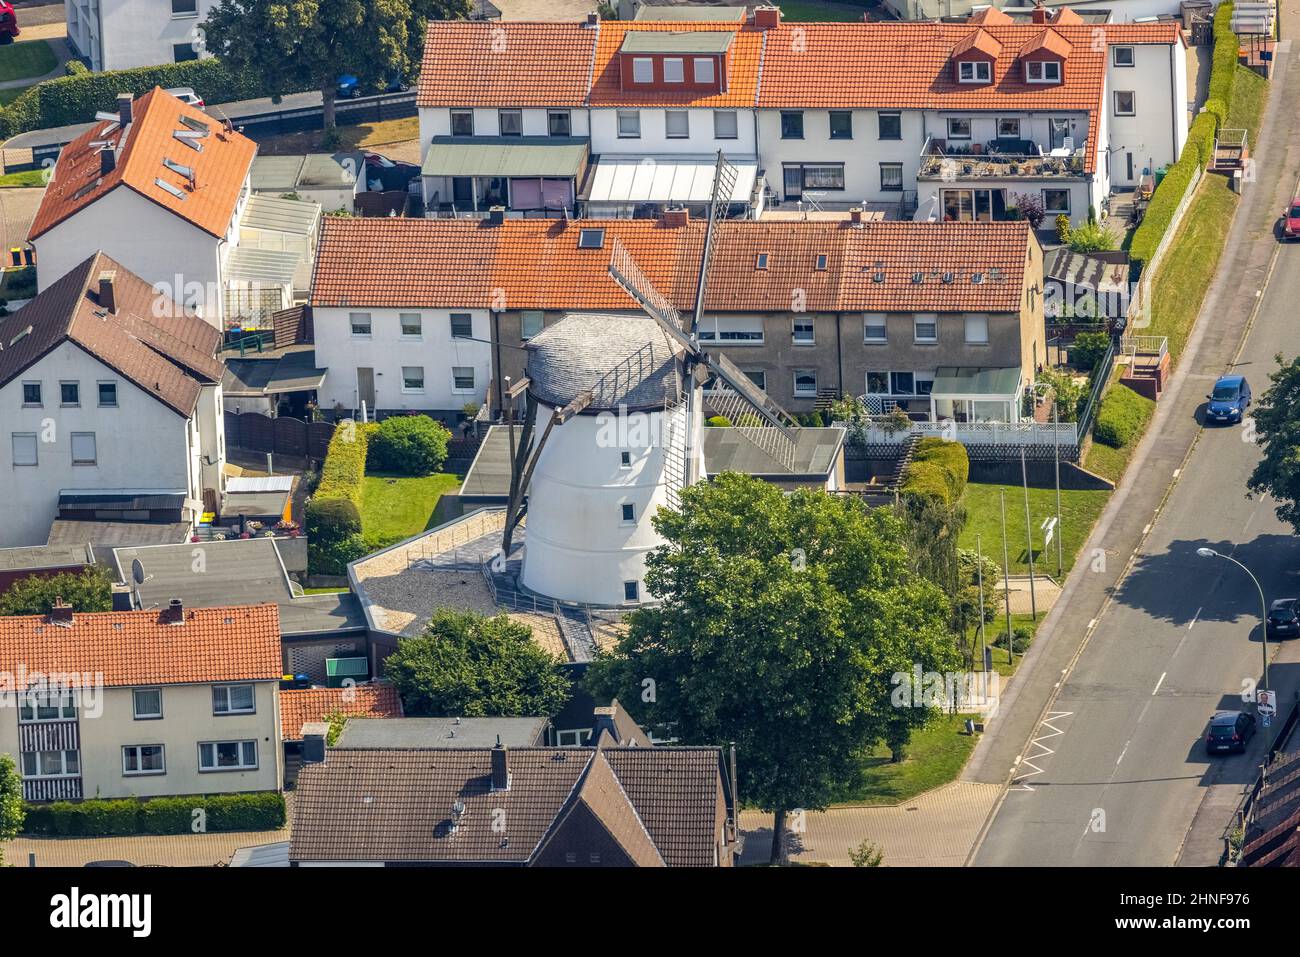 Aerial view, adult education centre in the monument Old Mill Bönen in Bönen, cultural centre Old Mill Bönen, Ruhr area, North Rhine-Westphalia, German Stock Photo